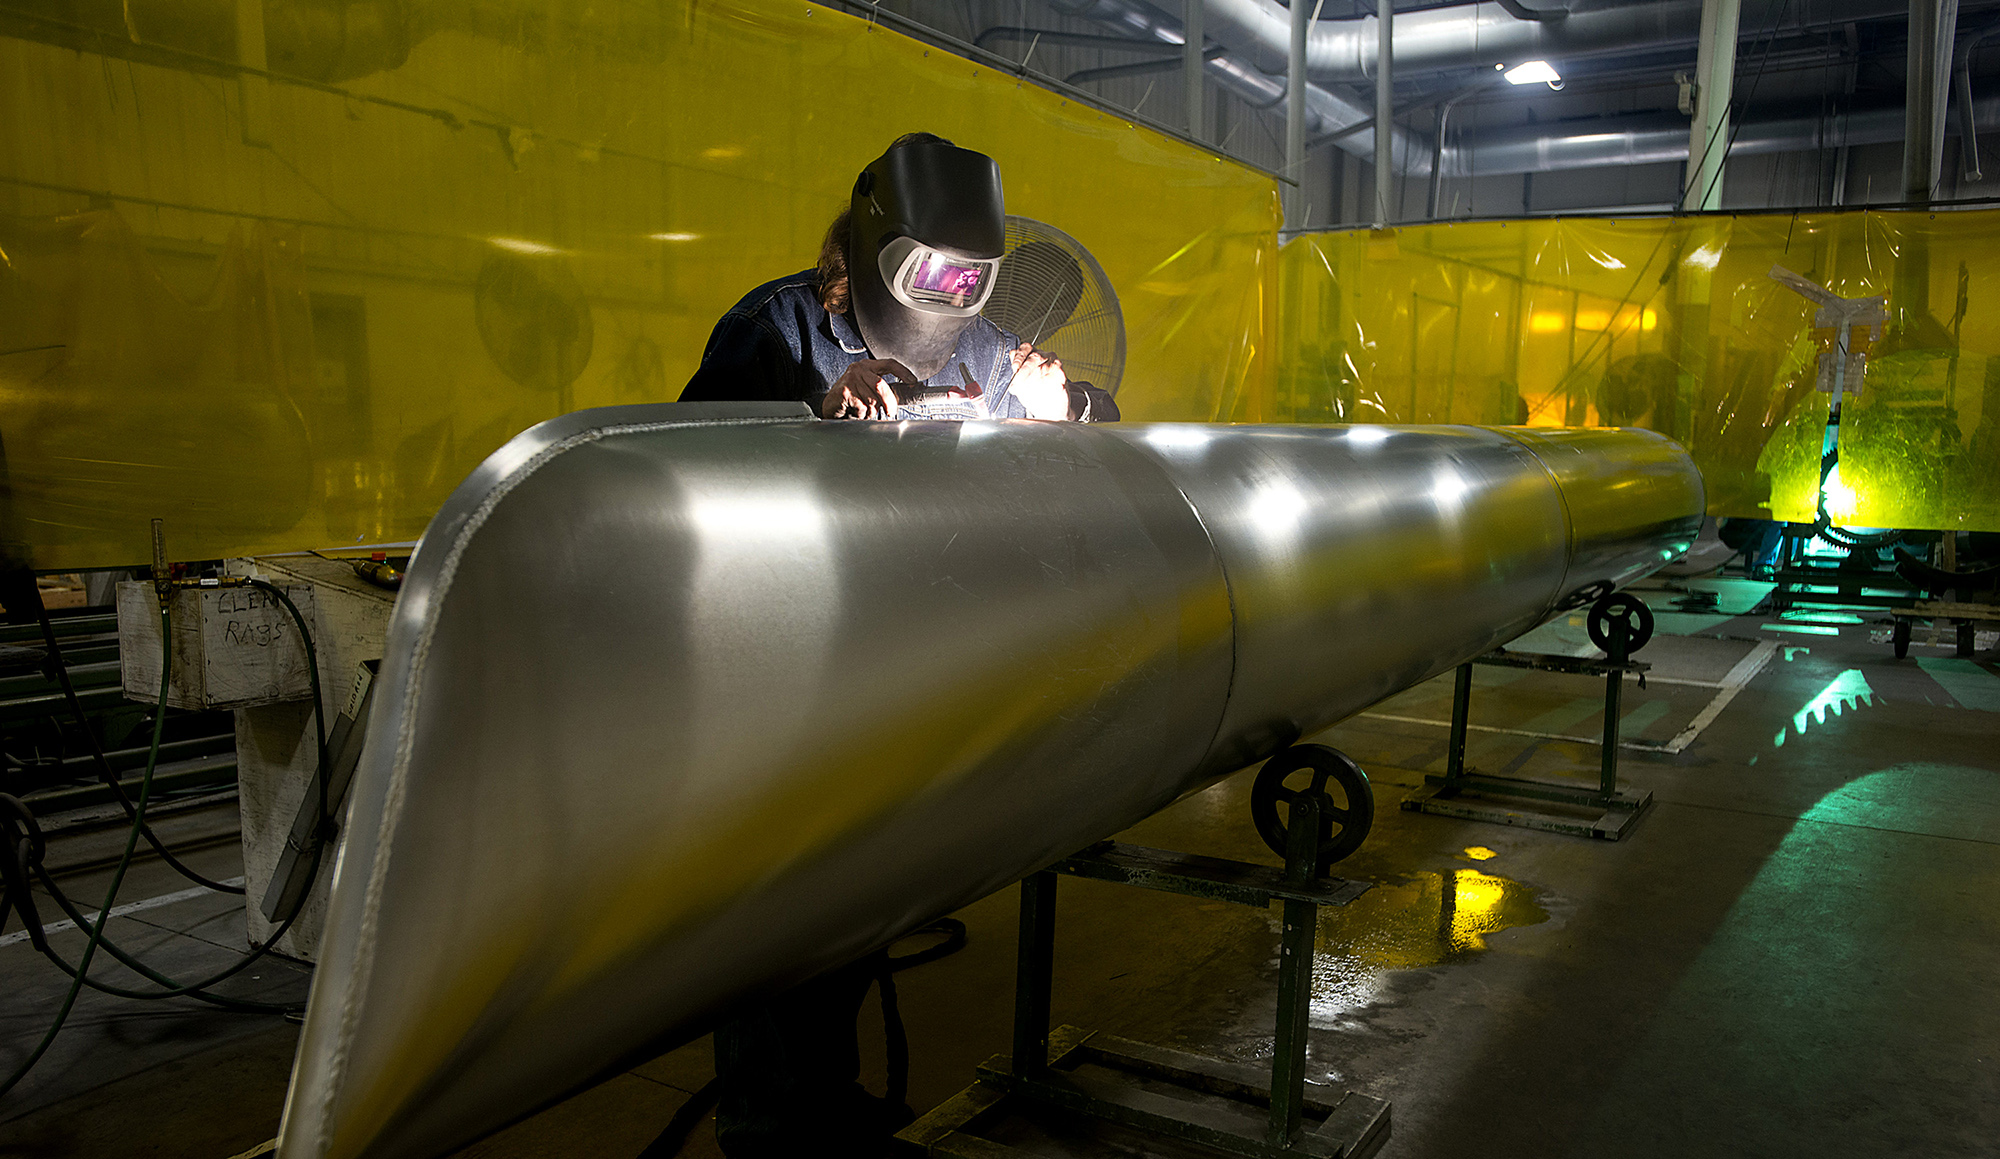 A worker welds an aluminum pontoon at a production facility in Elkhart, Indiana.